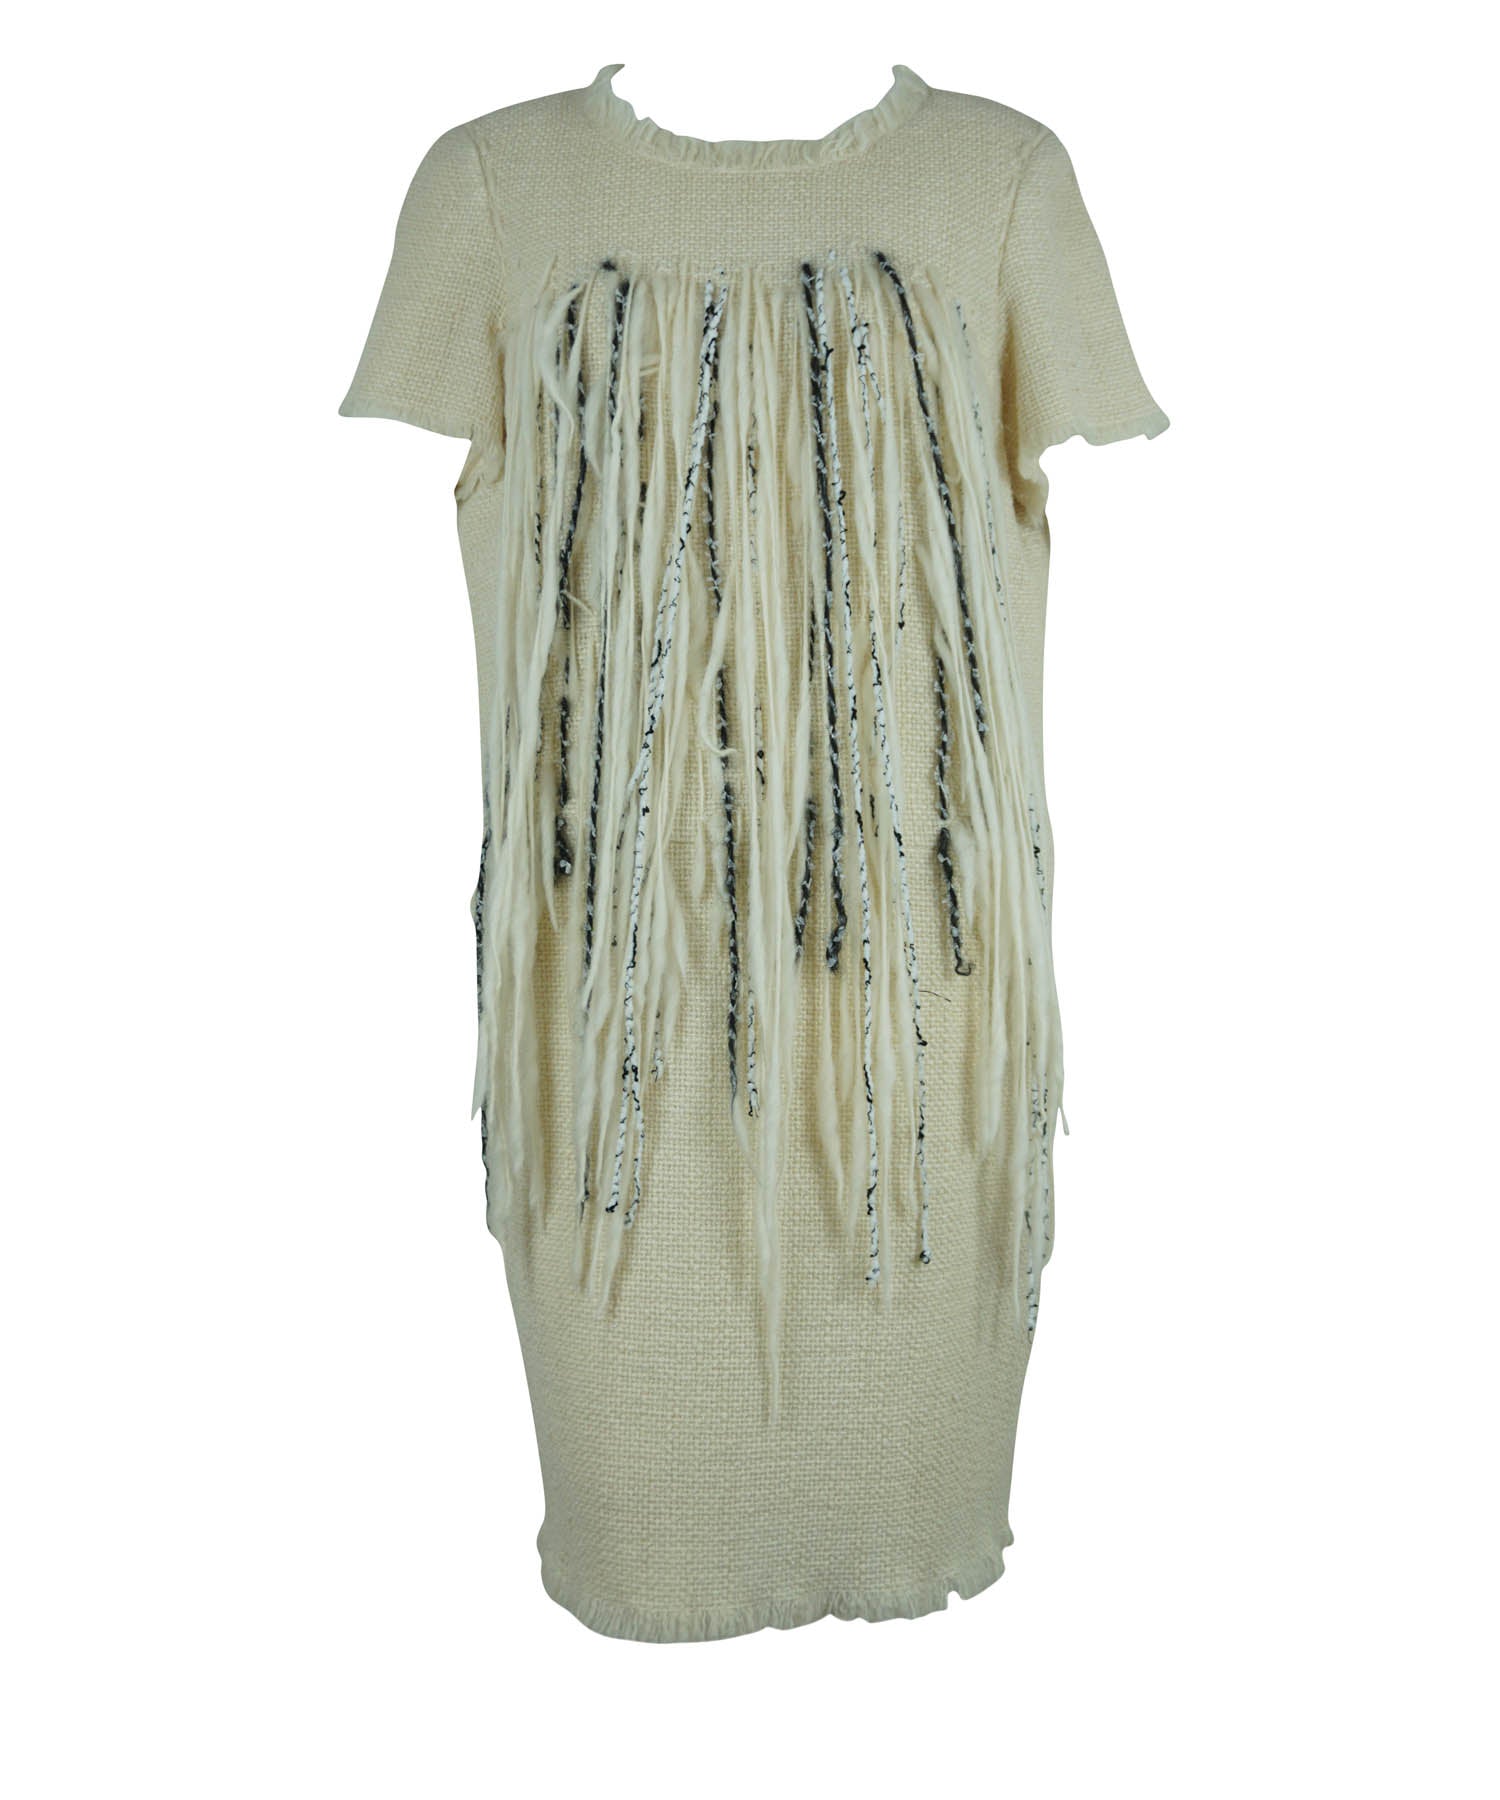 Chanel Tweed Dress with Pearl and Fringe Detail Sz 42